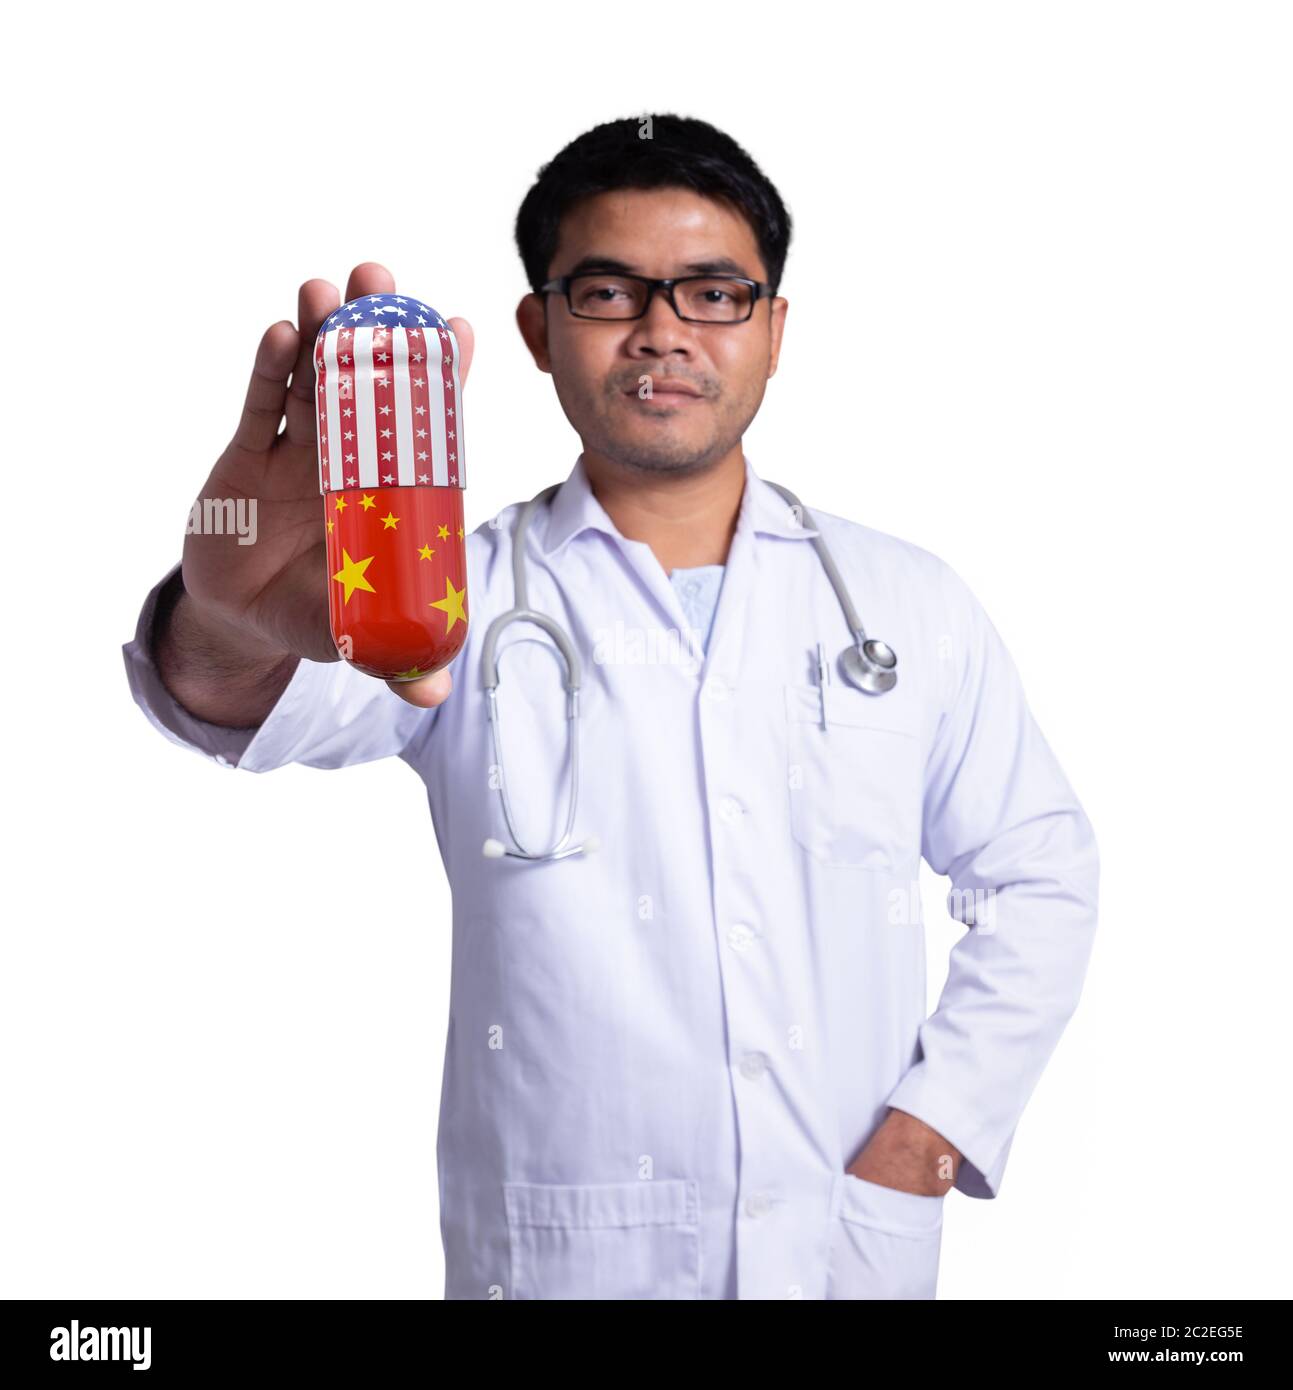 Doctor showing mockup of medicine capsules for treatment Covid-19 infectious disea drug invented by America and China, Medical concept Stock Photo